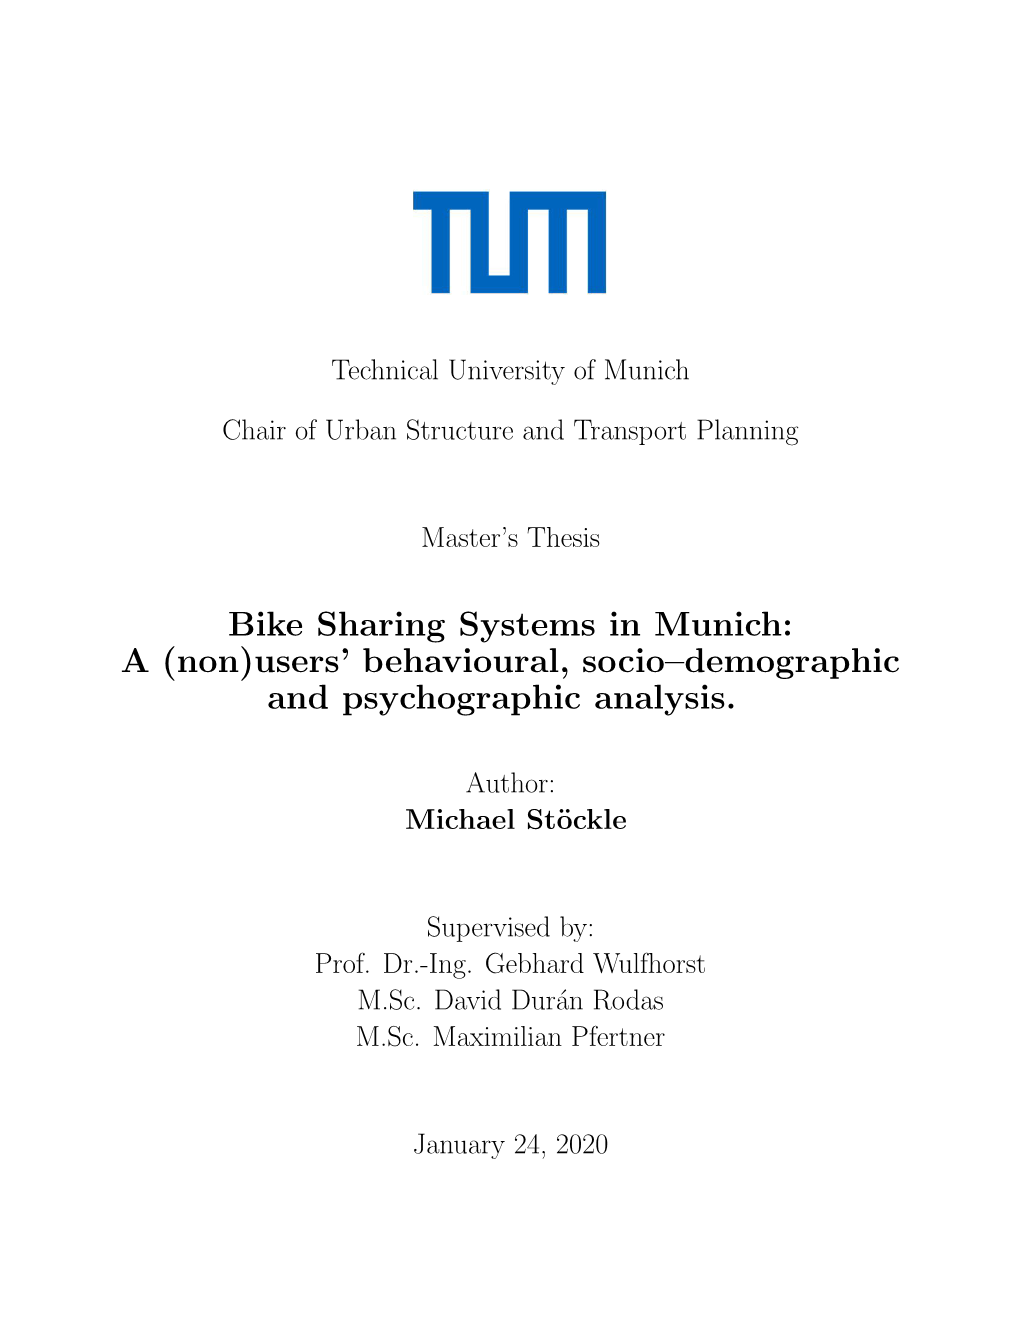 Bike Sharing Systems in Munich: a (Non)Users' Behavioural, Socio–Demographic and Psychographic Analysis